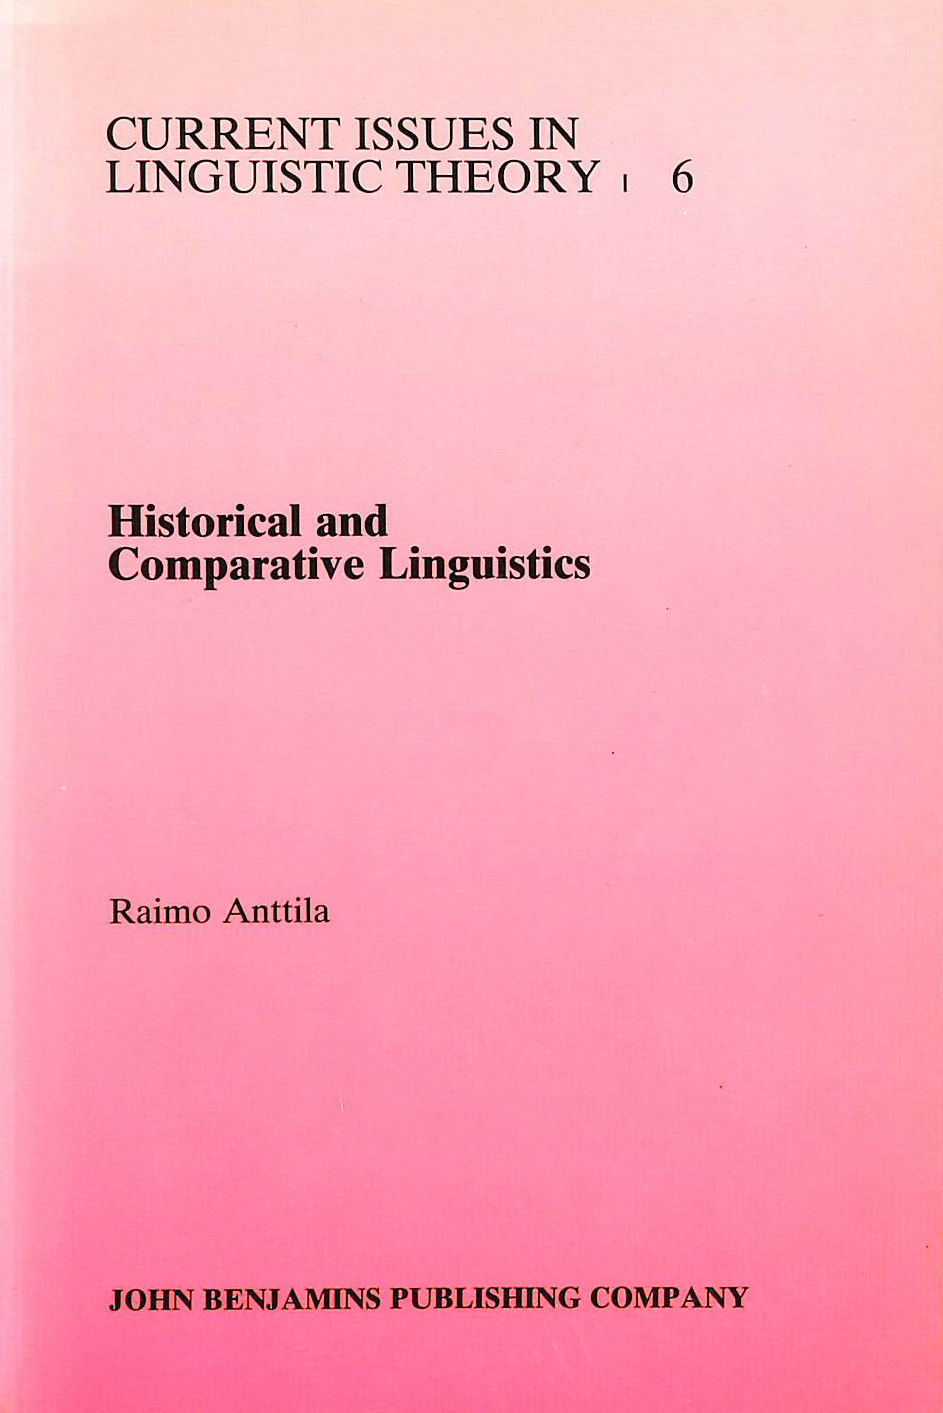 RAIMO ANTTILA - Historical and Comparative Linguistics: 6 (Current Issues in Linguistic Theory)